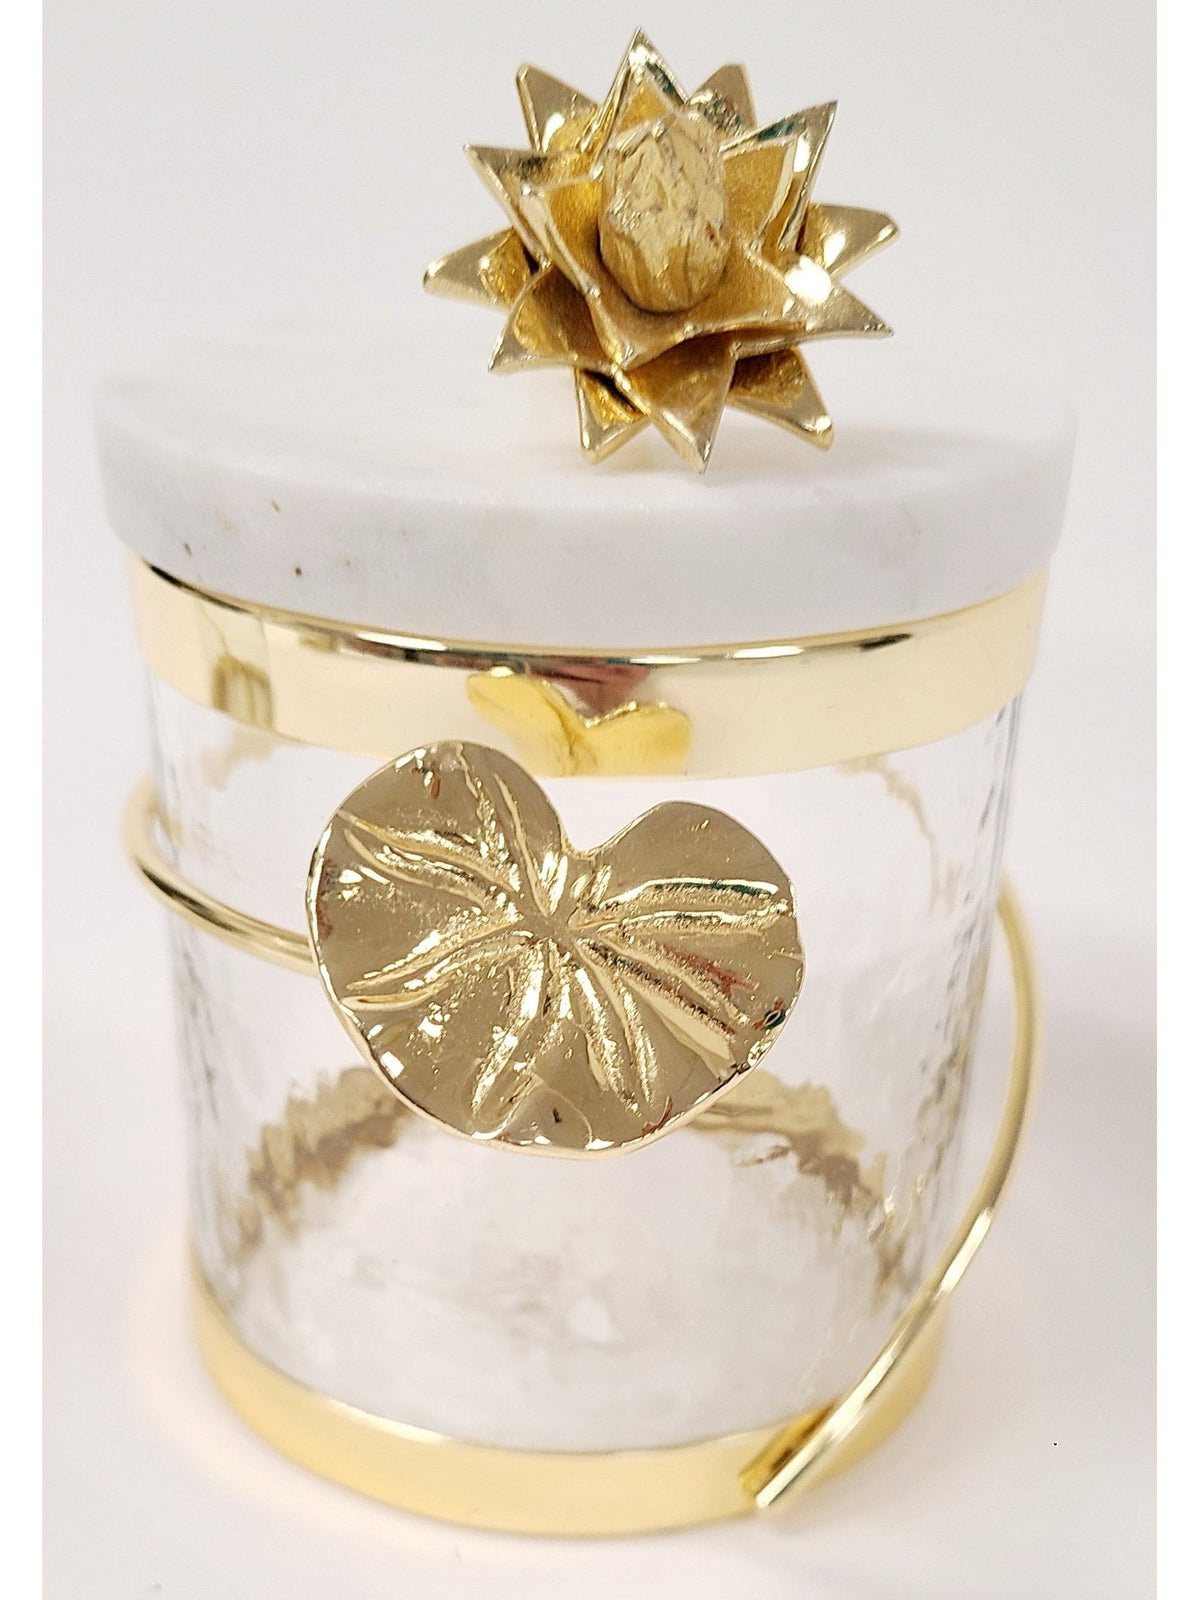 https://www.shopinspiremehomedecor.shop/wp-content/uploads/1693/26/save-big-on-glass-canister-with-gold-leaf-design-marble-lid-with-metal-flower-3-styles-3-sizes-inspire-me-home-decor-get-the-top-products-and-service-at-affordable-prices_3.jpg